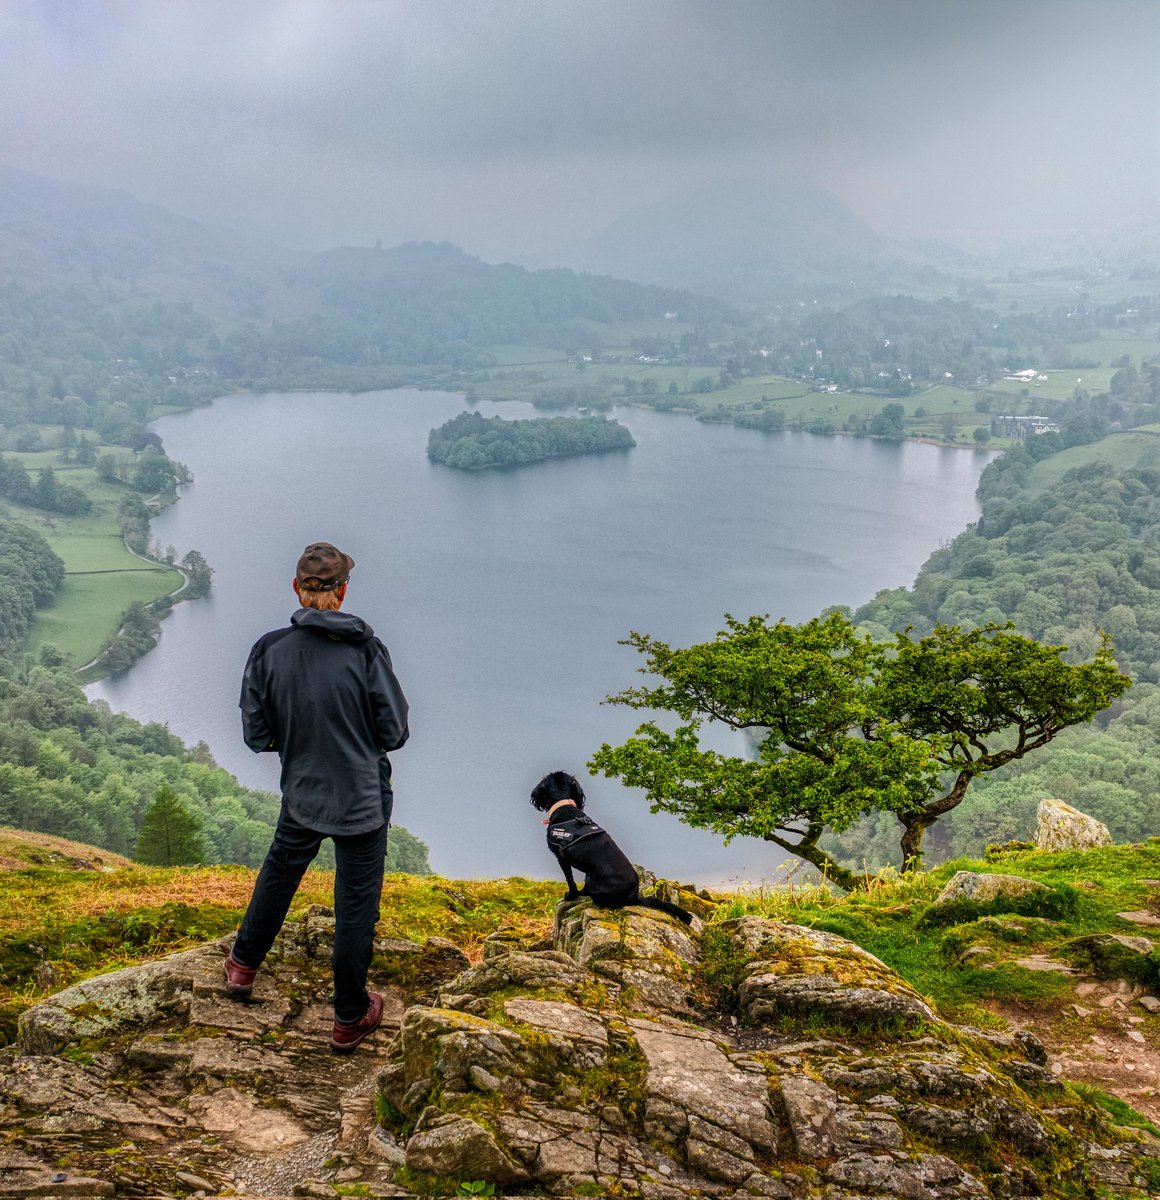 Morning everyone hope you are well. It doesn't always have to be sunshine and blue skies to enjoy being out and taking in the views. Overlooking Grasmere. Have a great day. #LakeDistrict @keswickbootco